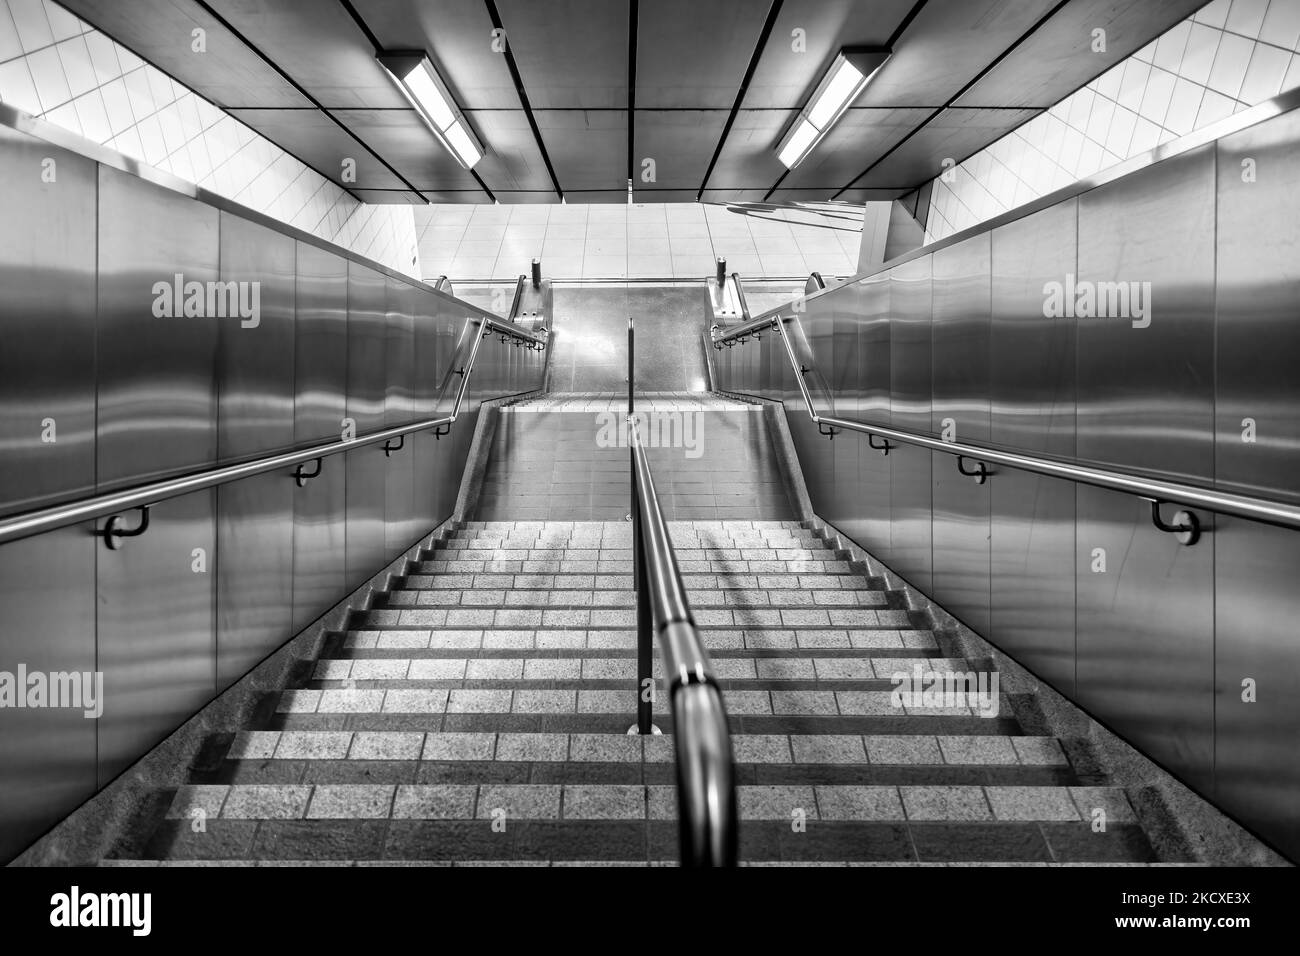 Toronto, Canada - October 26, 2022:  Abstract of a staircase inside a Bayview subway station, Canada Stock Photo